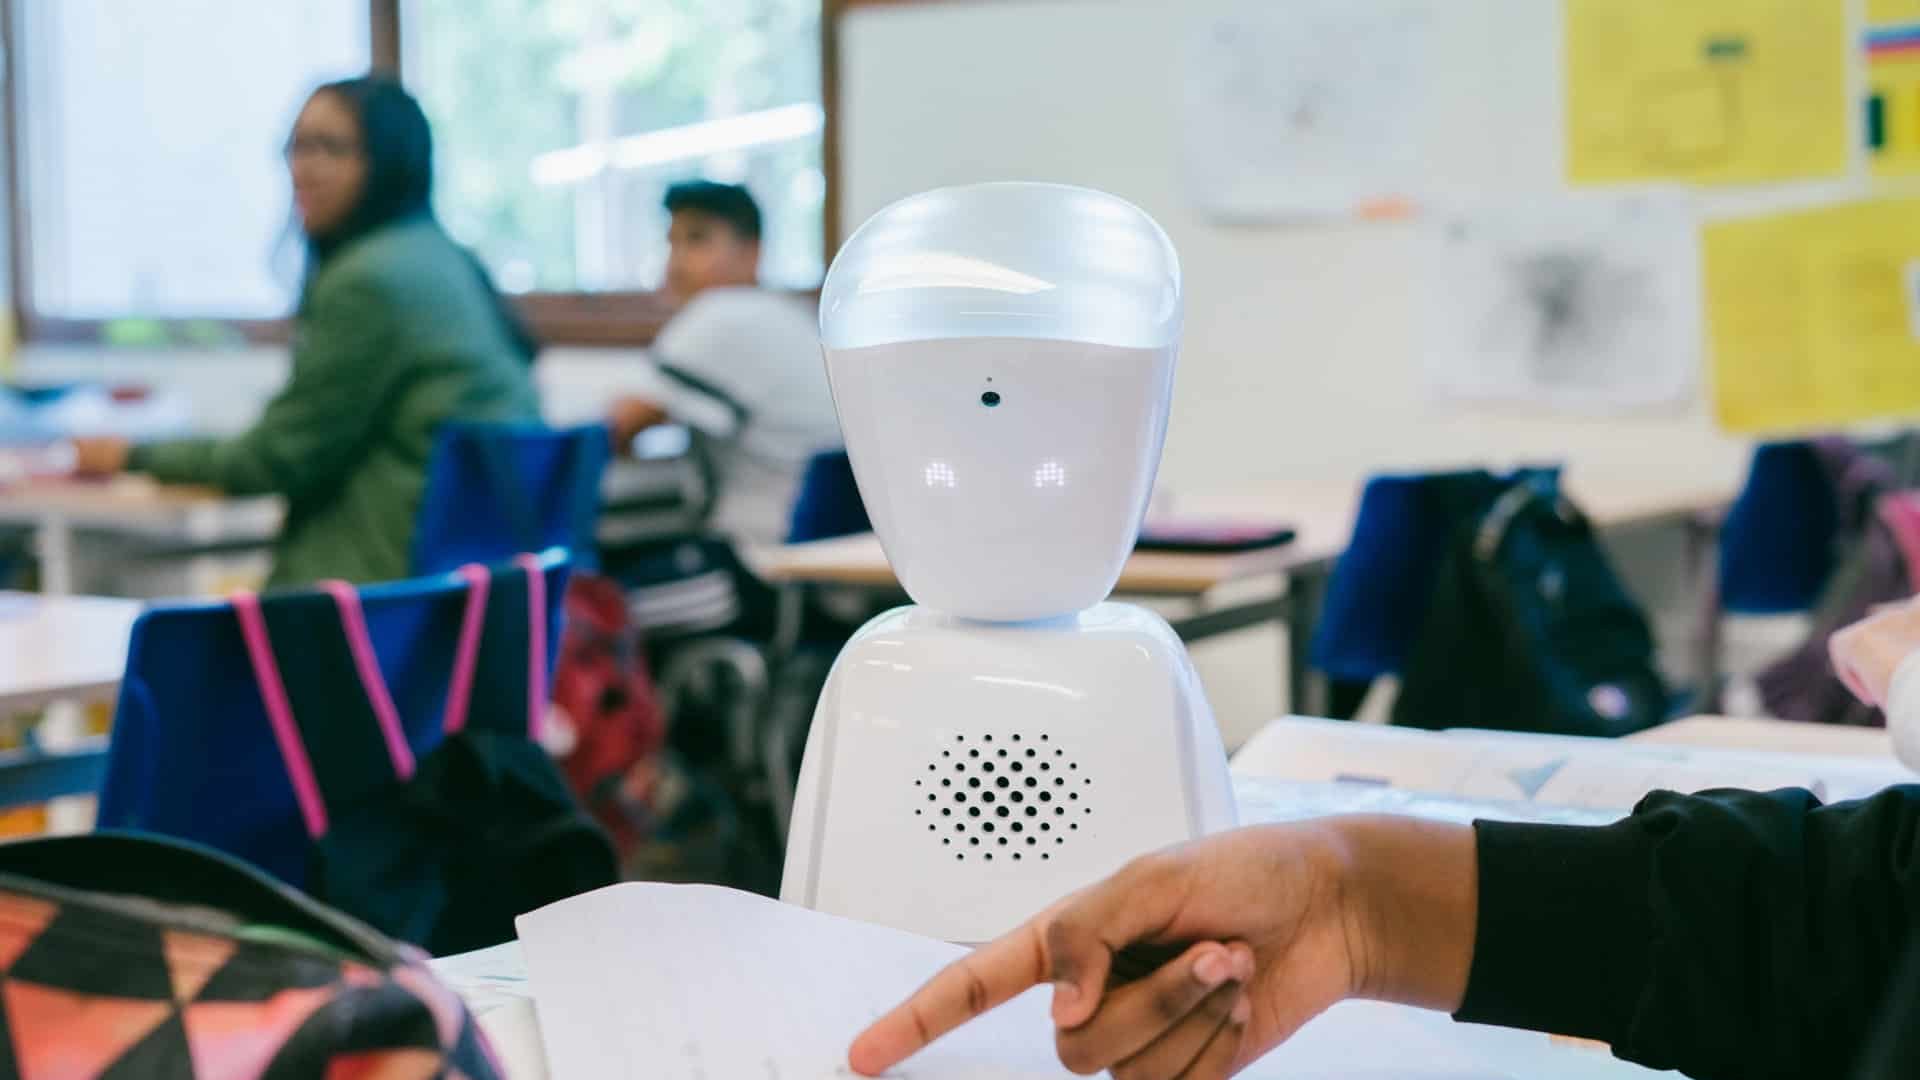 The remote learning robot